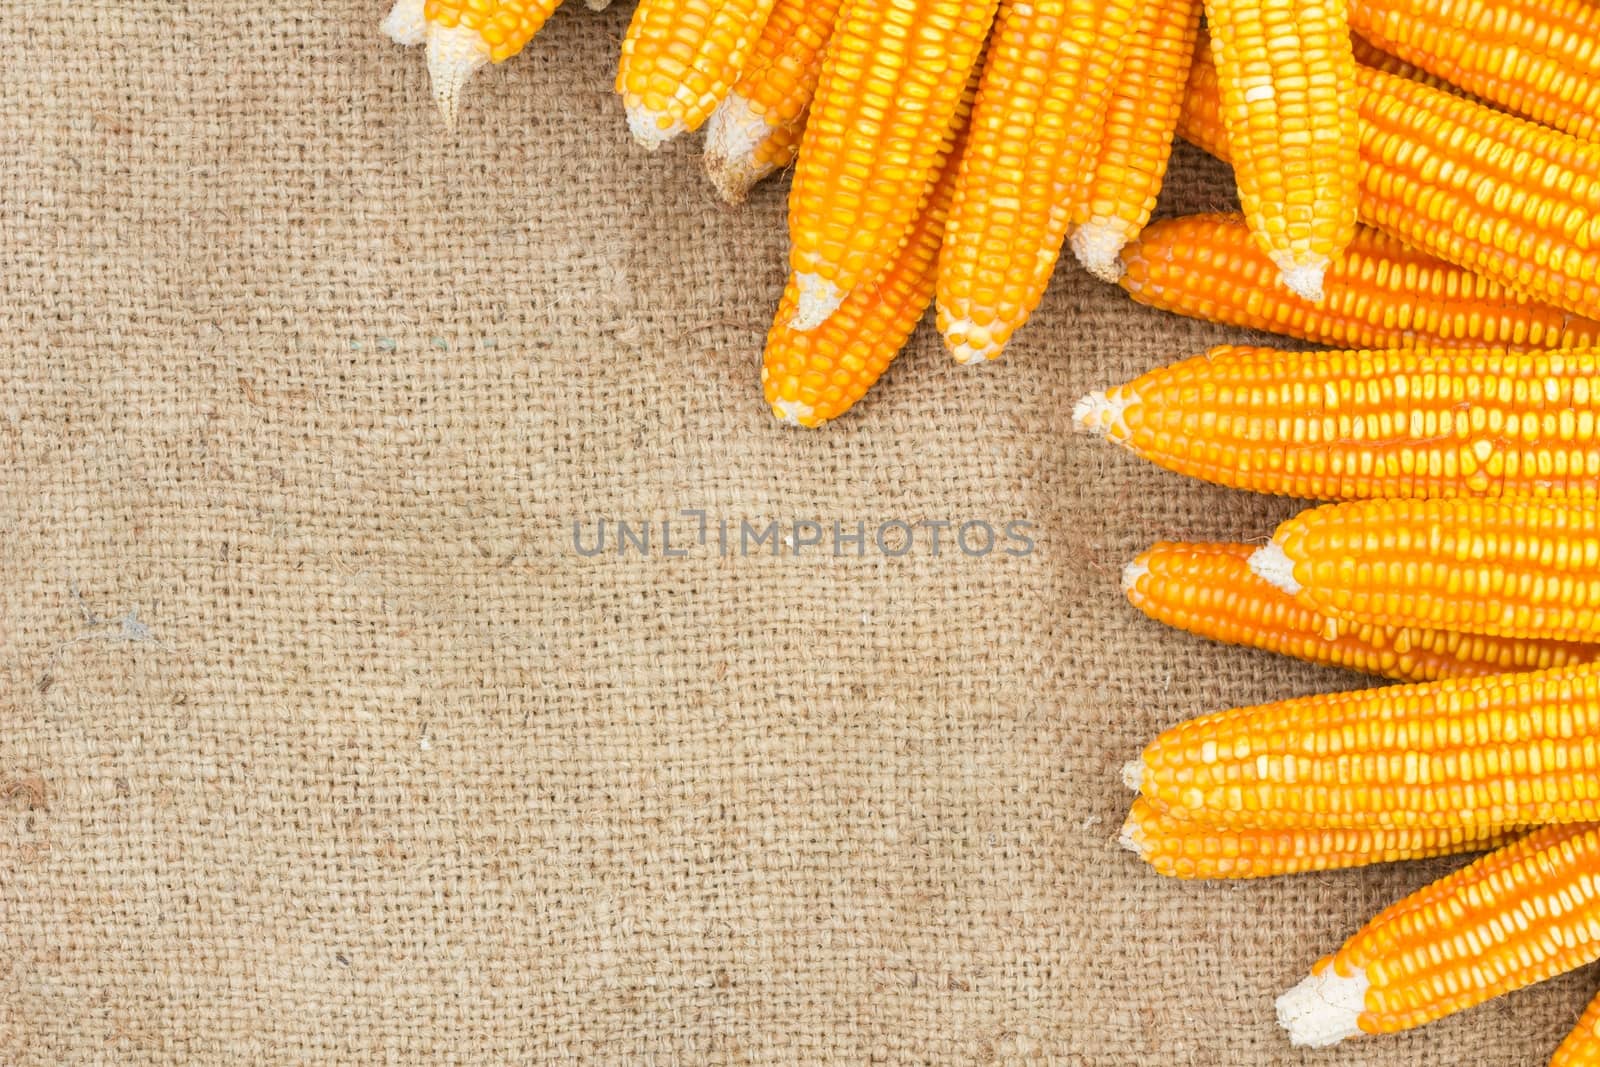 Ears of ripe corn on the gunnysack by a3701027